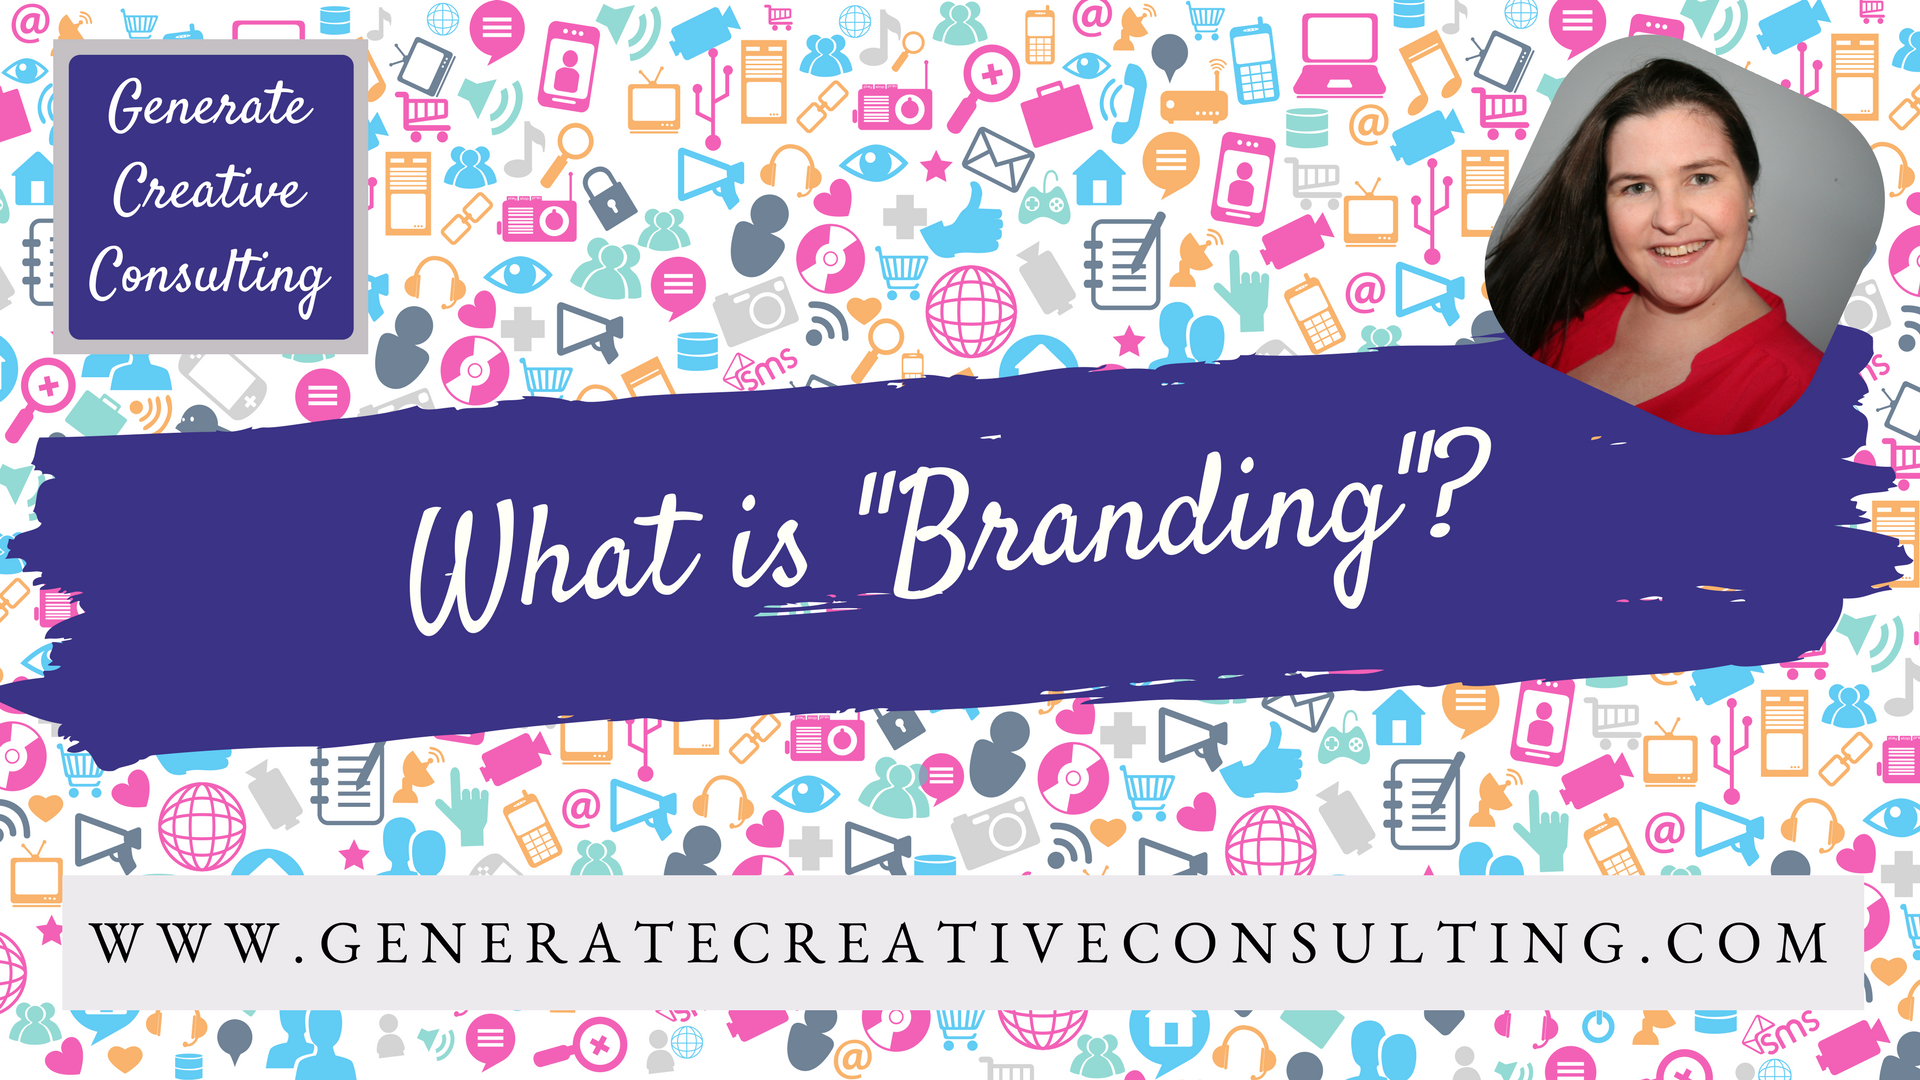 What is “Branding”?